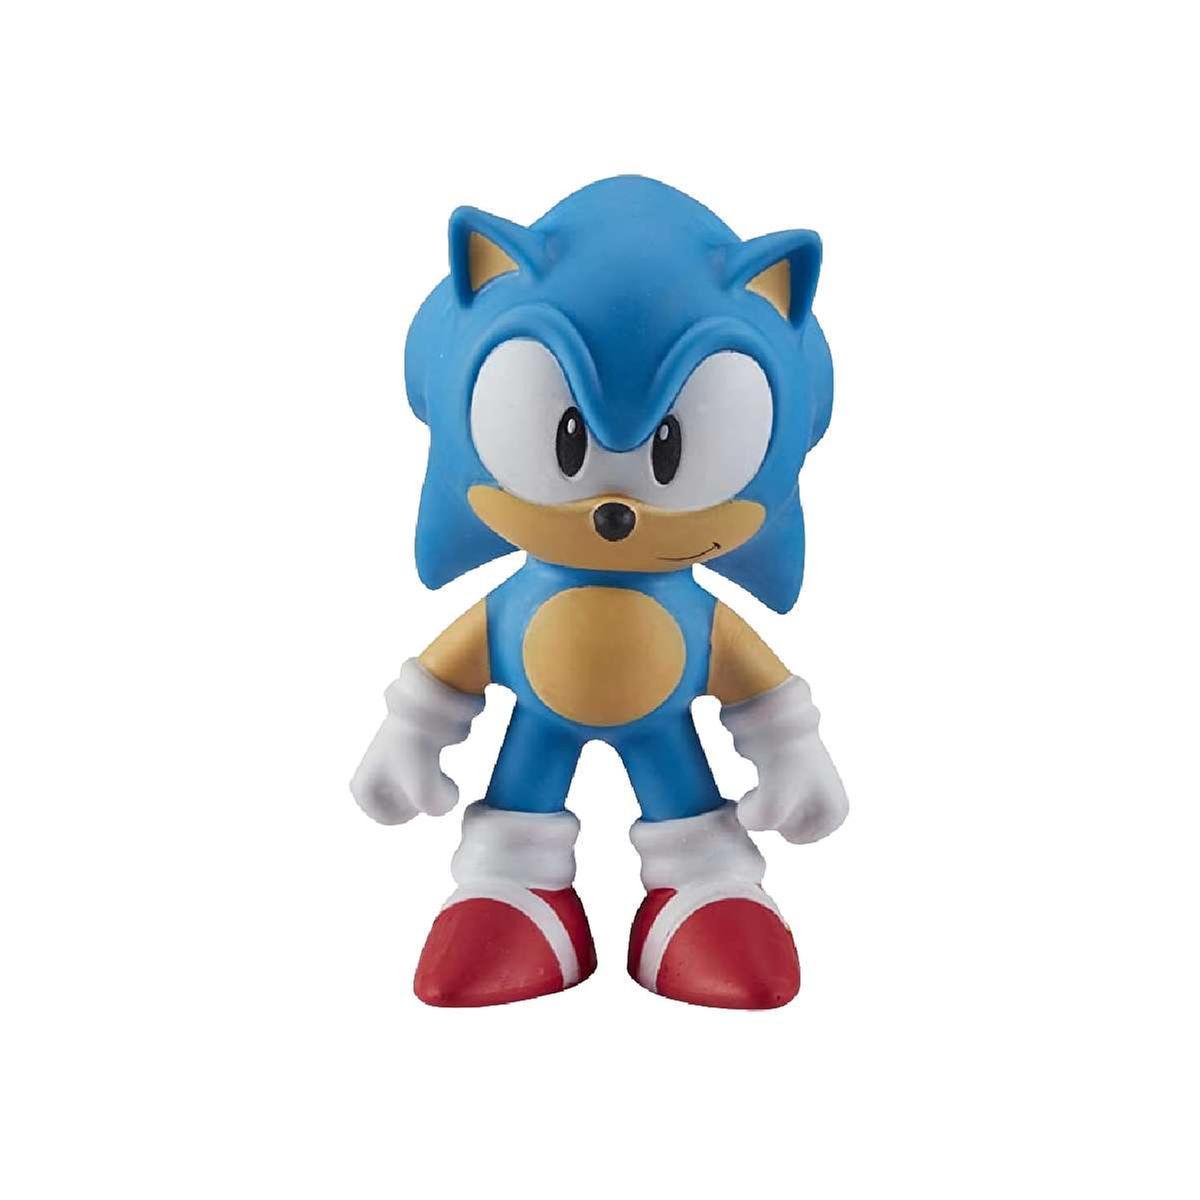 Sonic the Hedgehog - Sonic Minifigura Stretch, MISC ACTION FIGURES